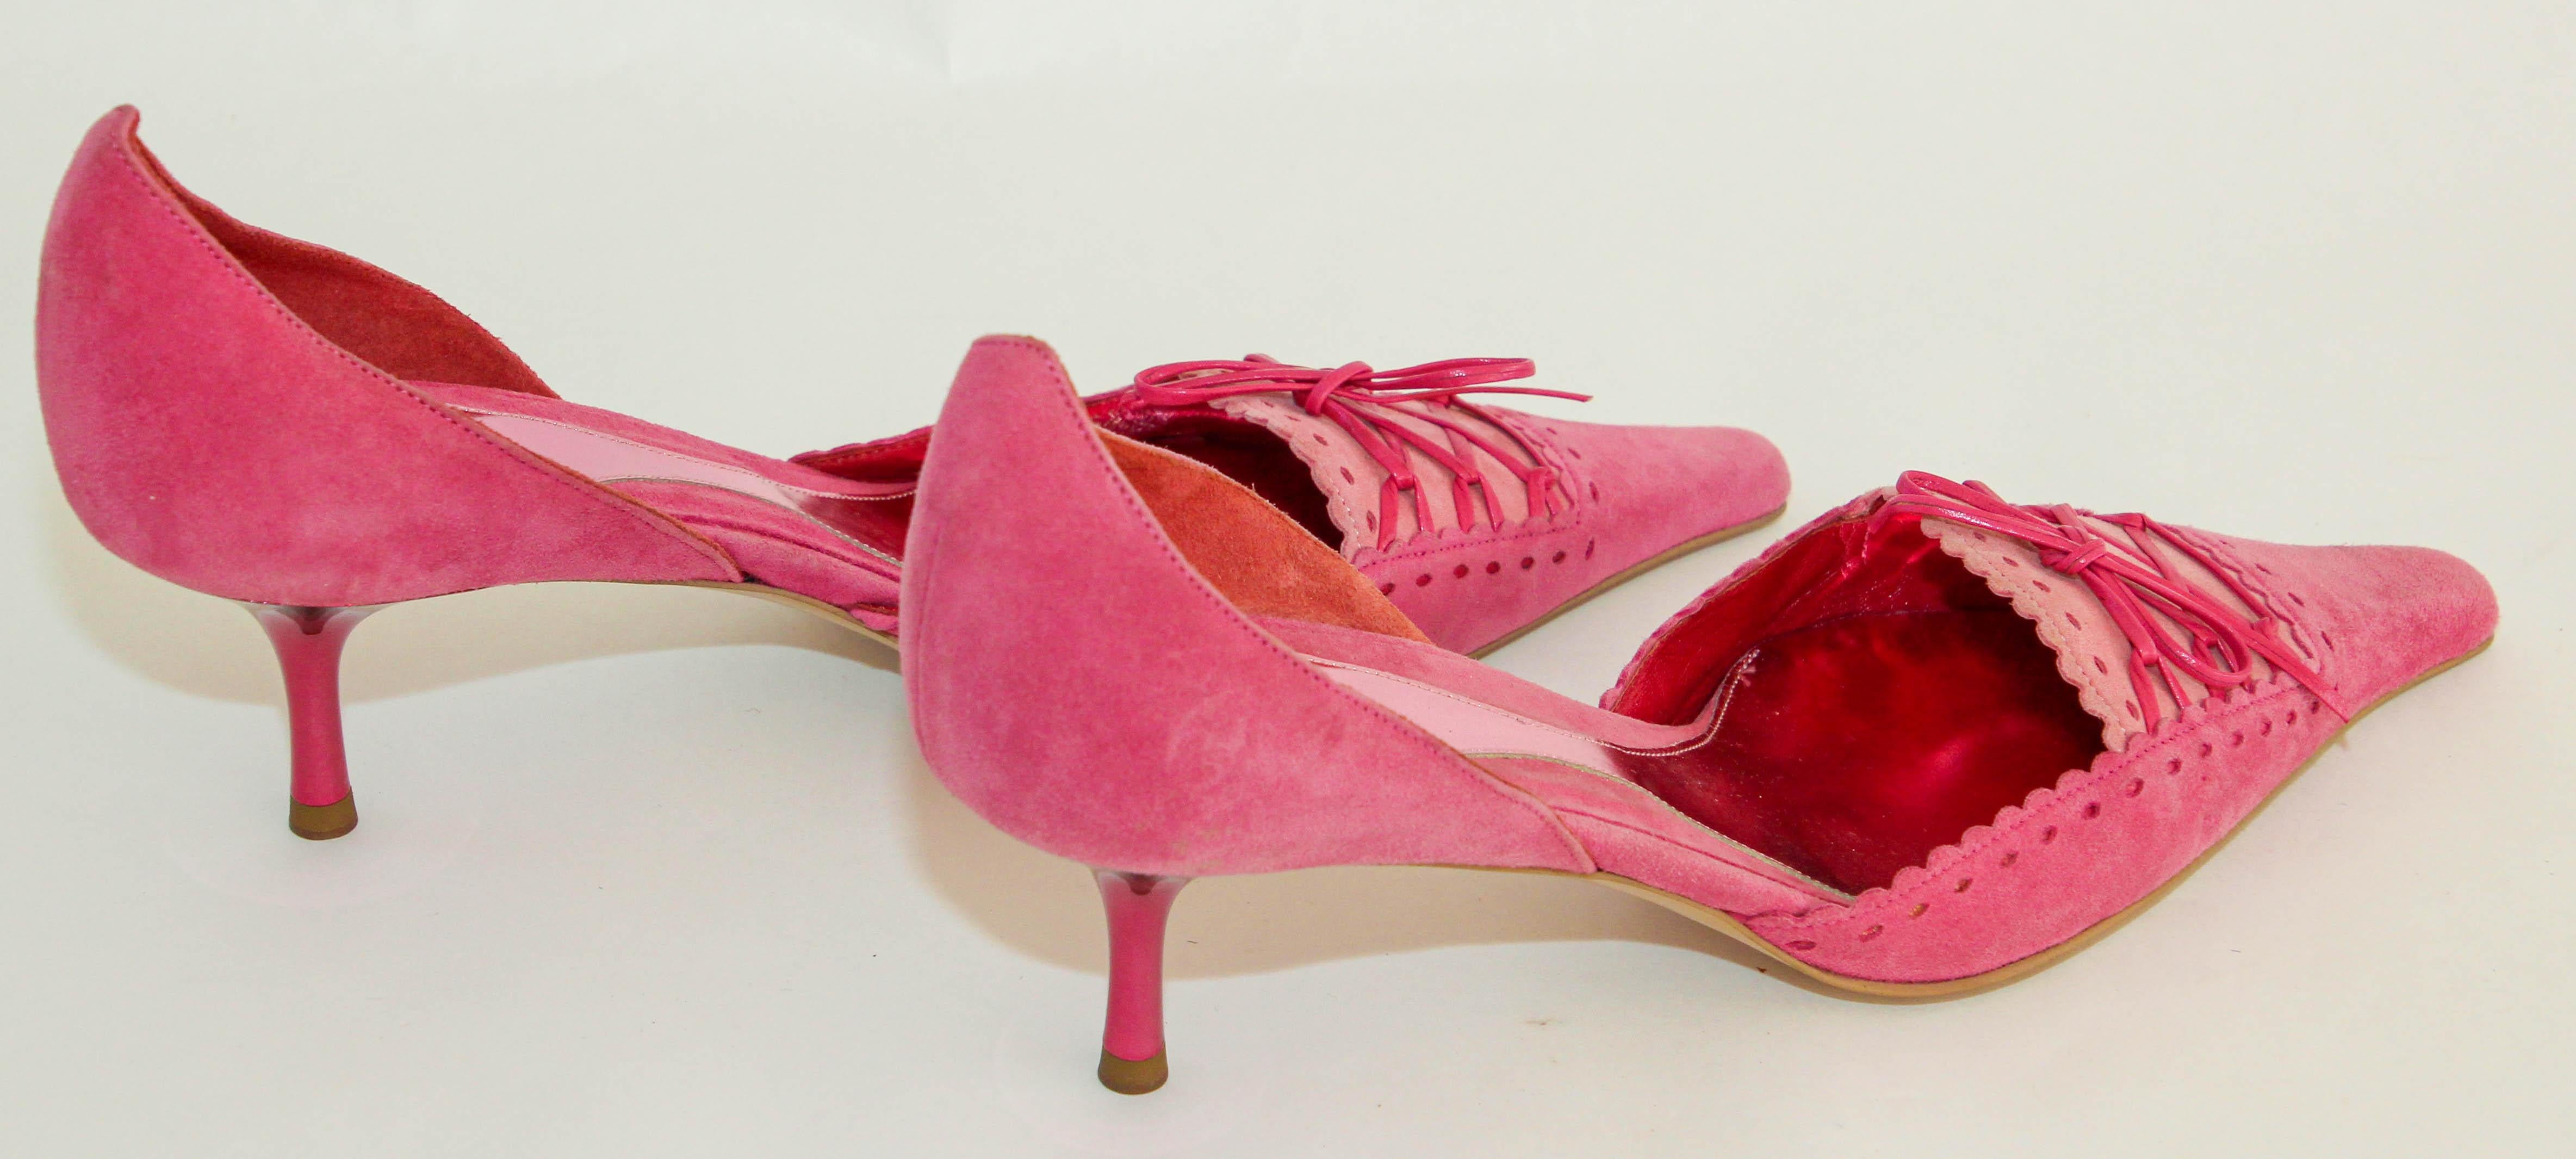 Escada Hot Pink Suede Pumps with Leather Details Size 36.5 Italy 6